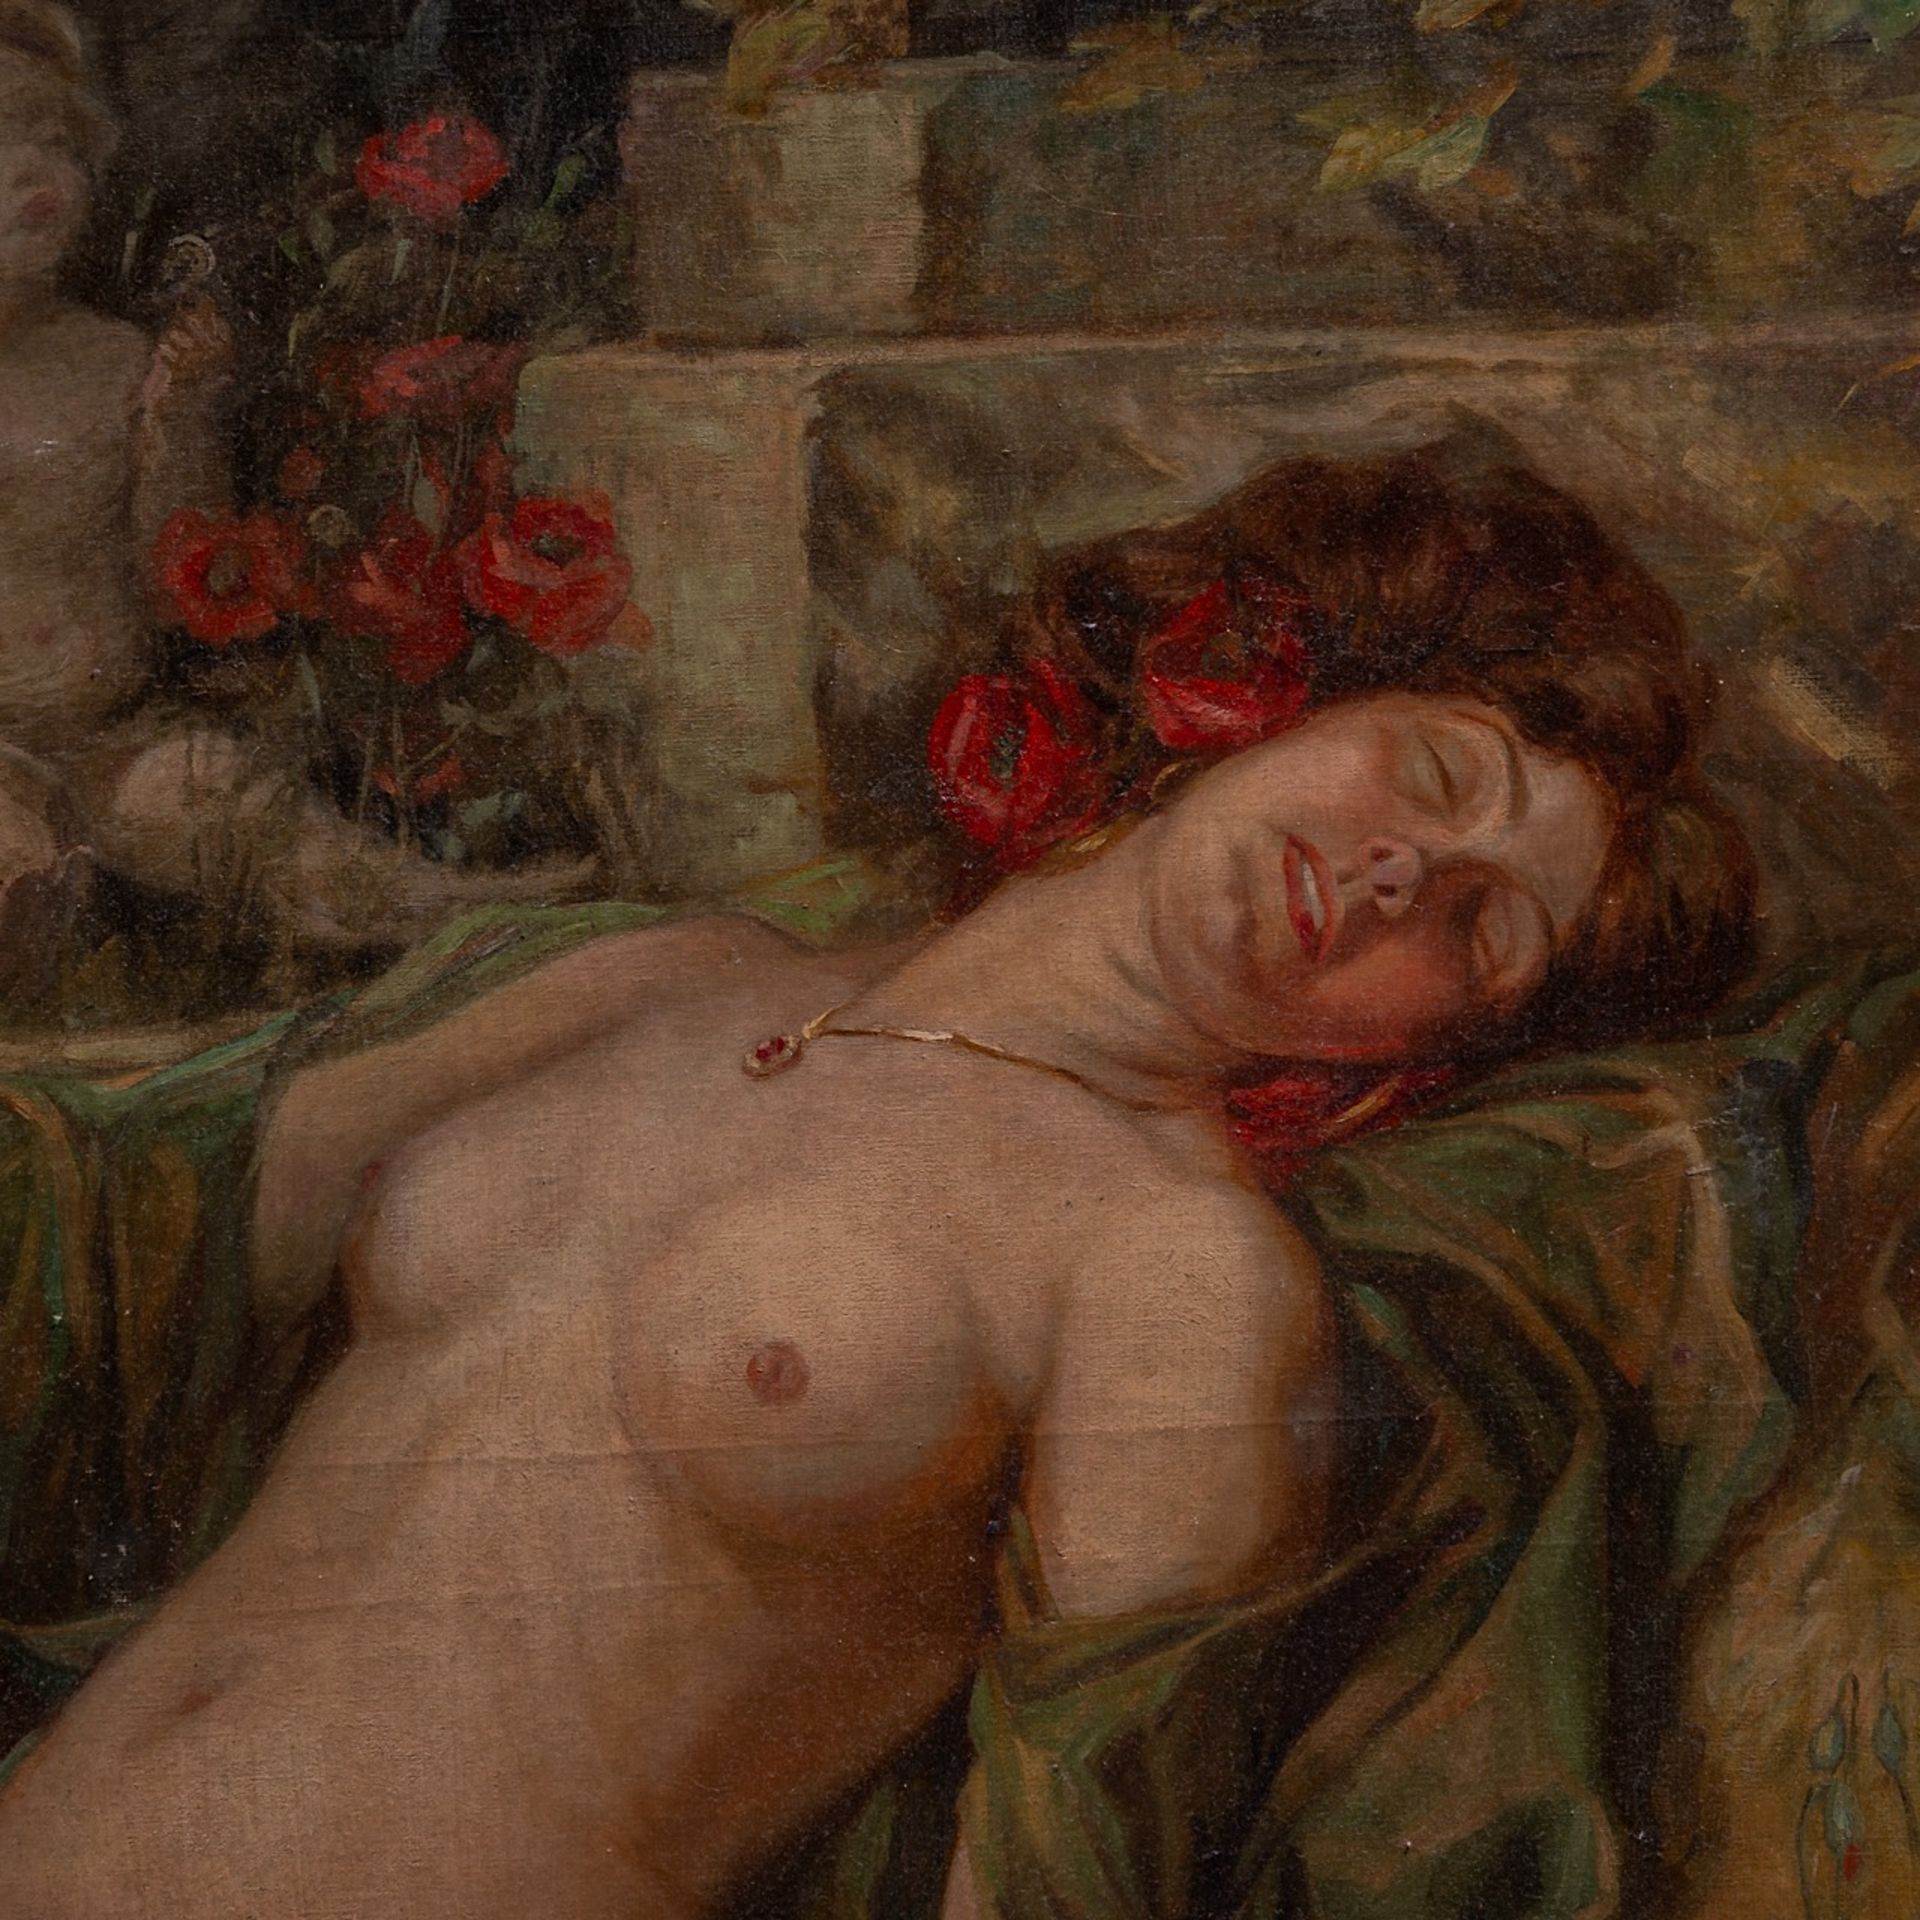 John William Schofield (1865-1944), sleeping nude, oil on canvas 110 x 160 cm. (43.3 x 62.9 in.) - Image 6 of 11